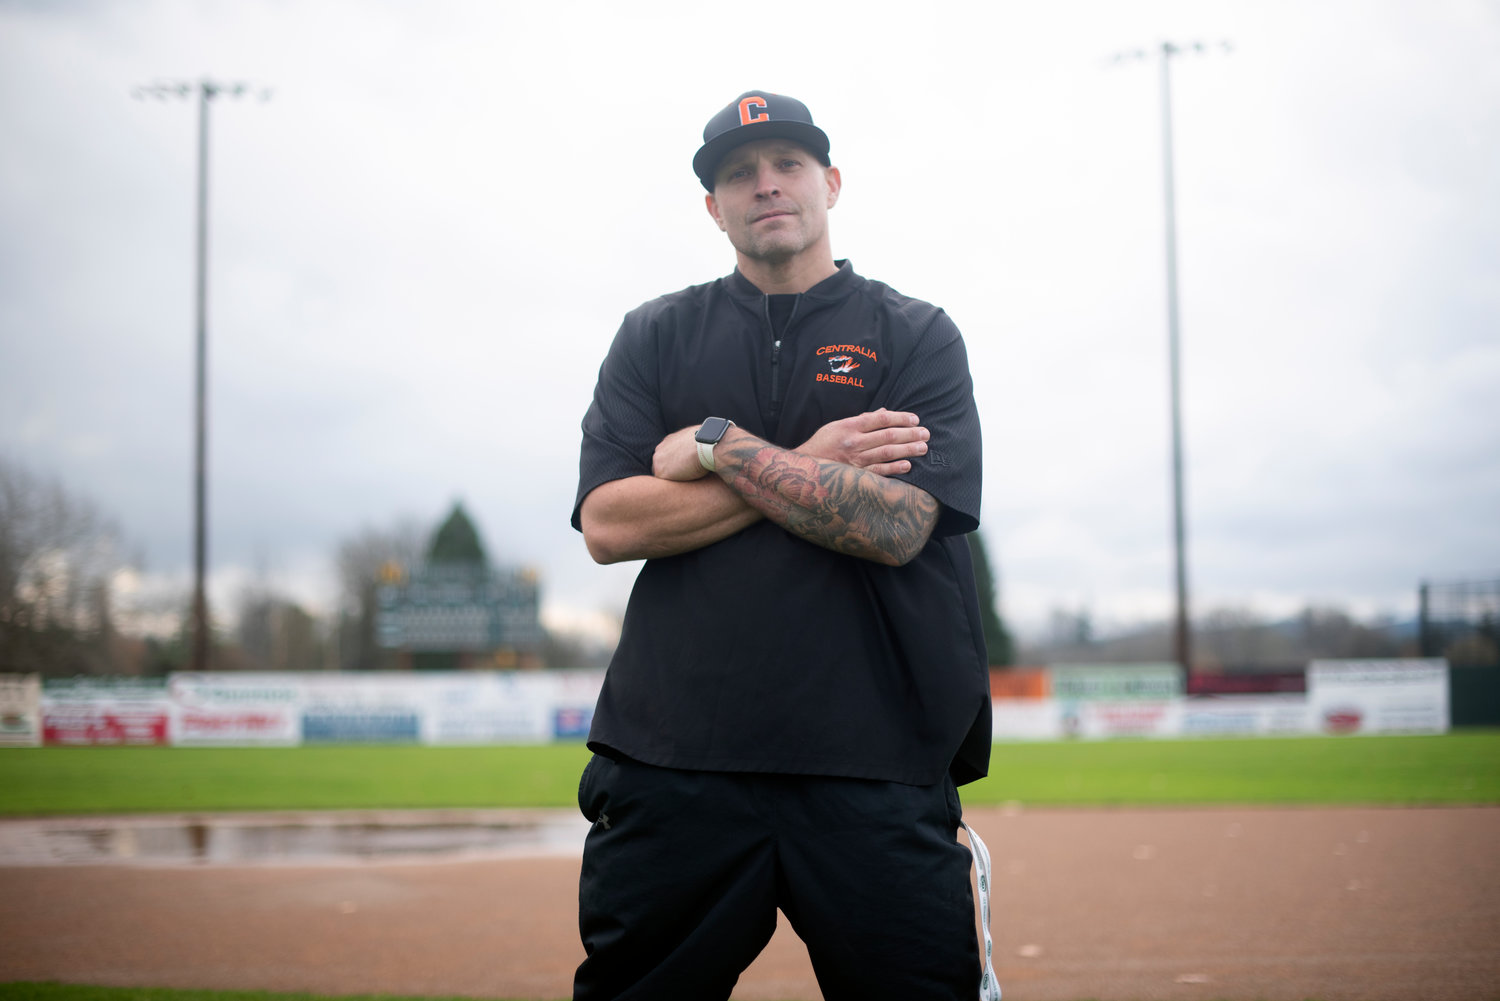 Adam Riffe, a 1998 Centralia High School graduate, was an all-league infielder and pitcher for the Tigers.